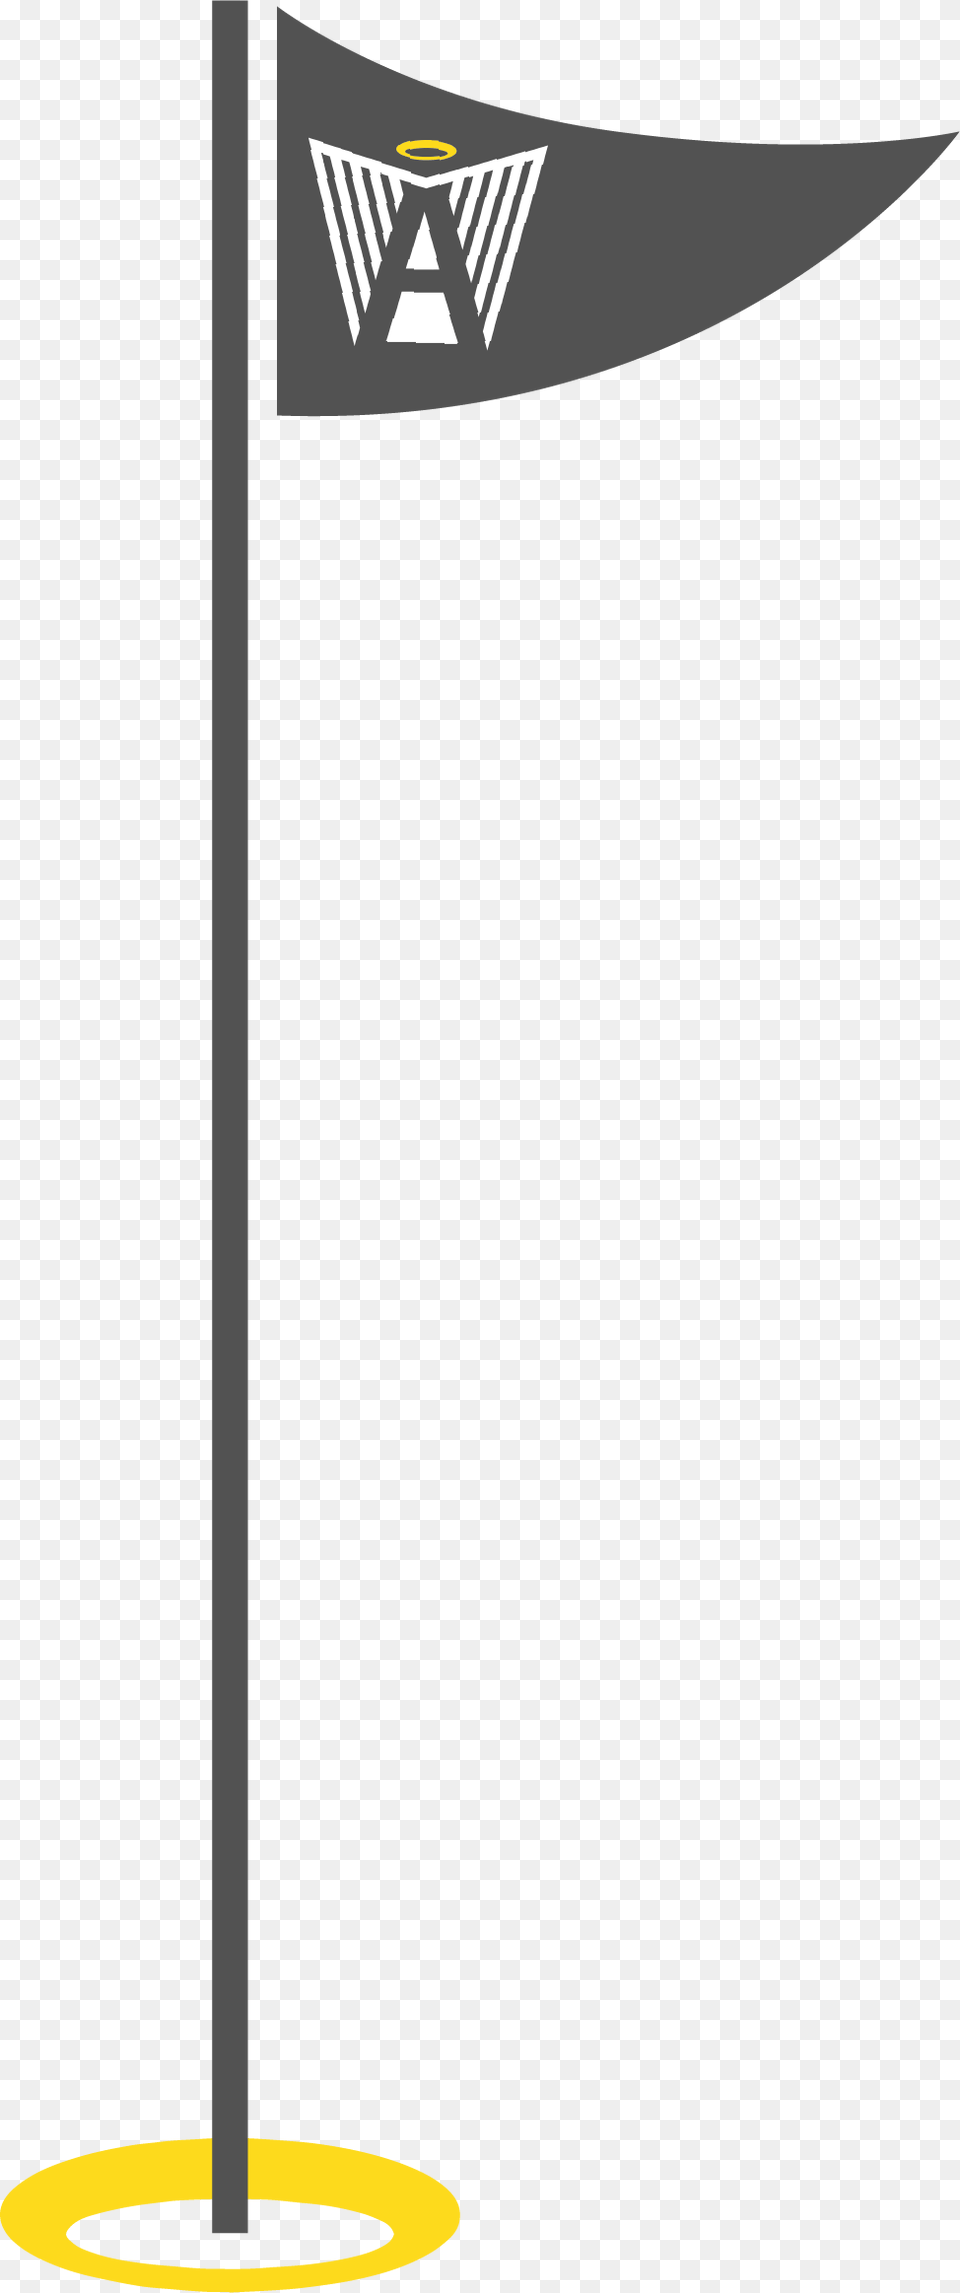 Lsa Golf Flag Beige, Bow, Weapon, Utility Pole Png Image